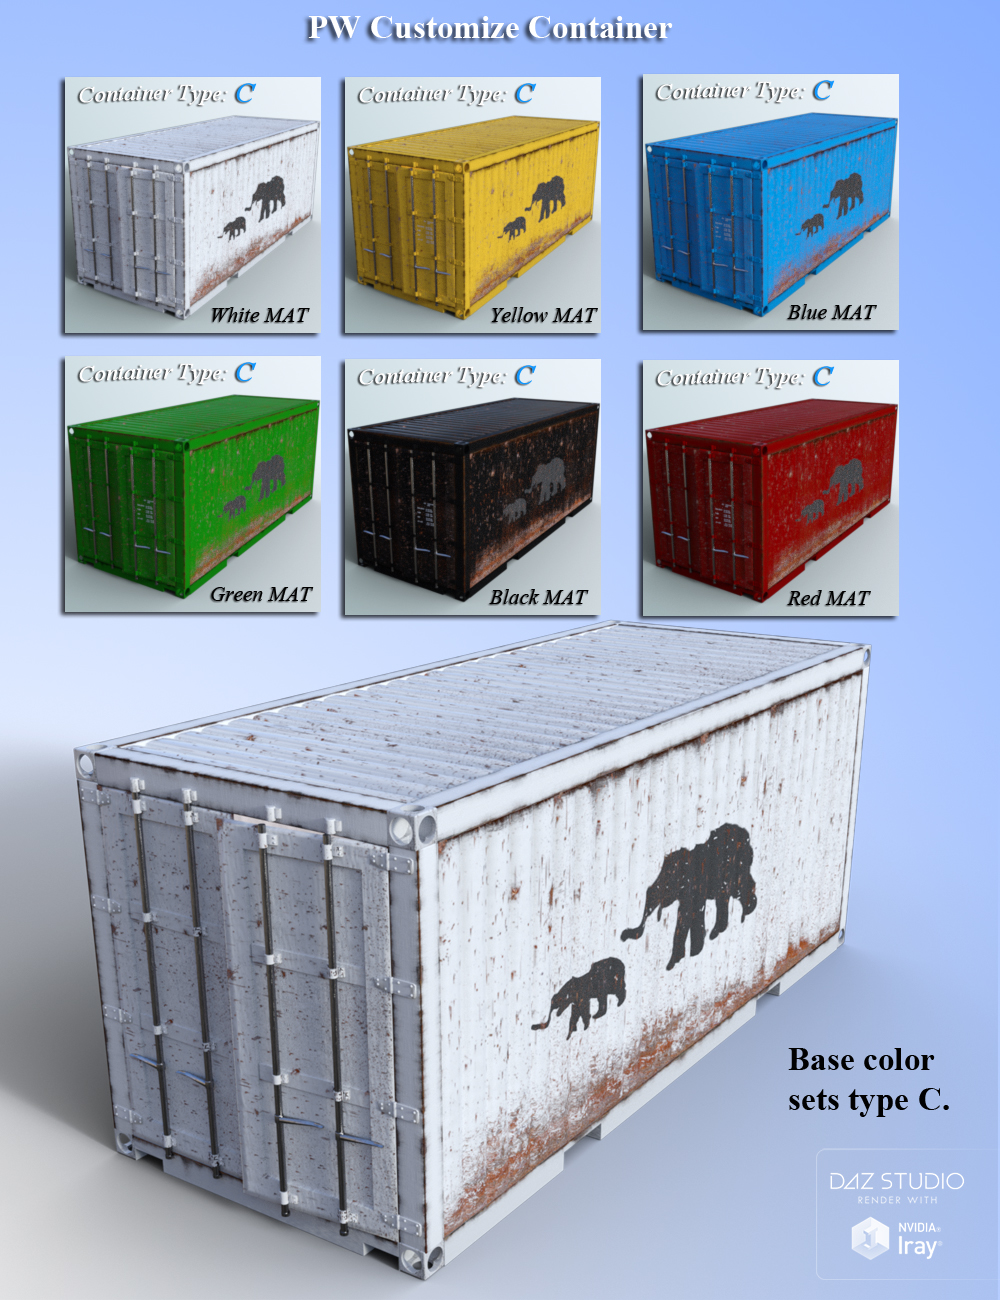 PW Customize Container by: PW Productions, 3D Models by Daz 3D